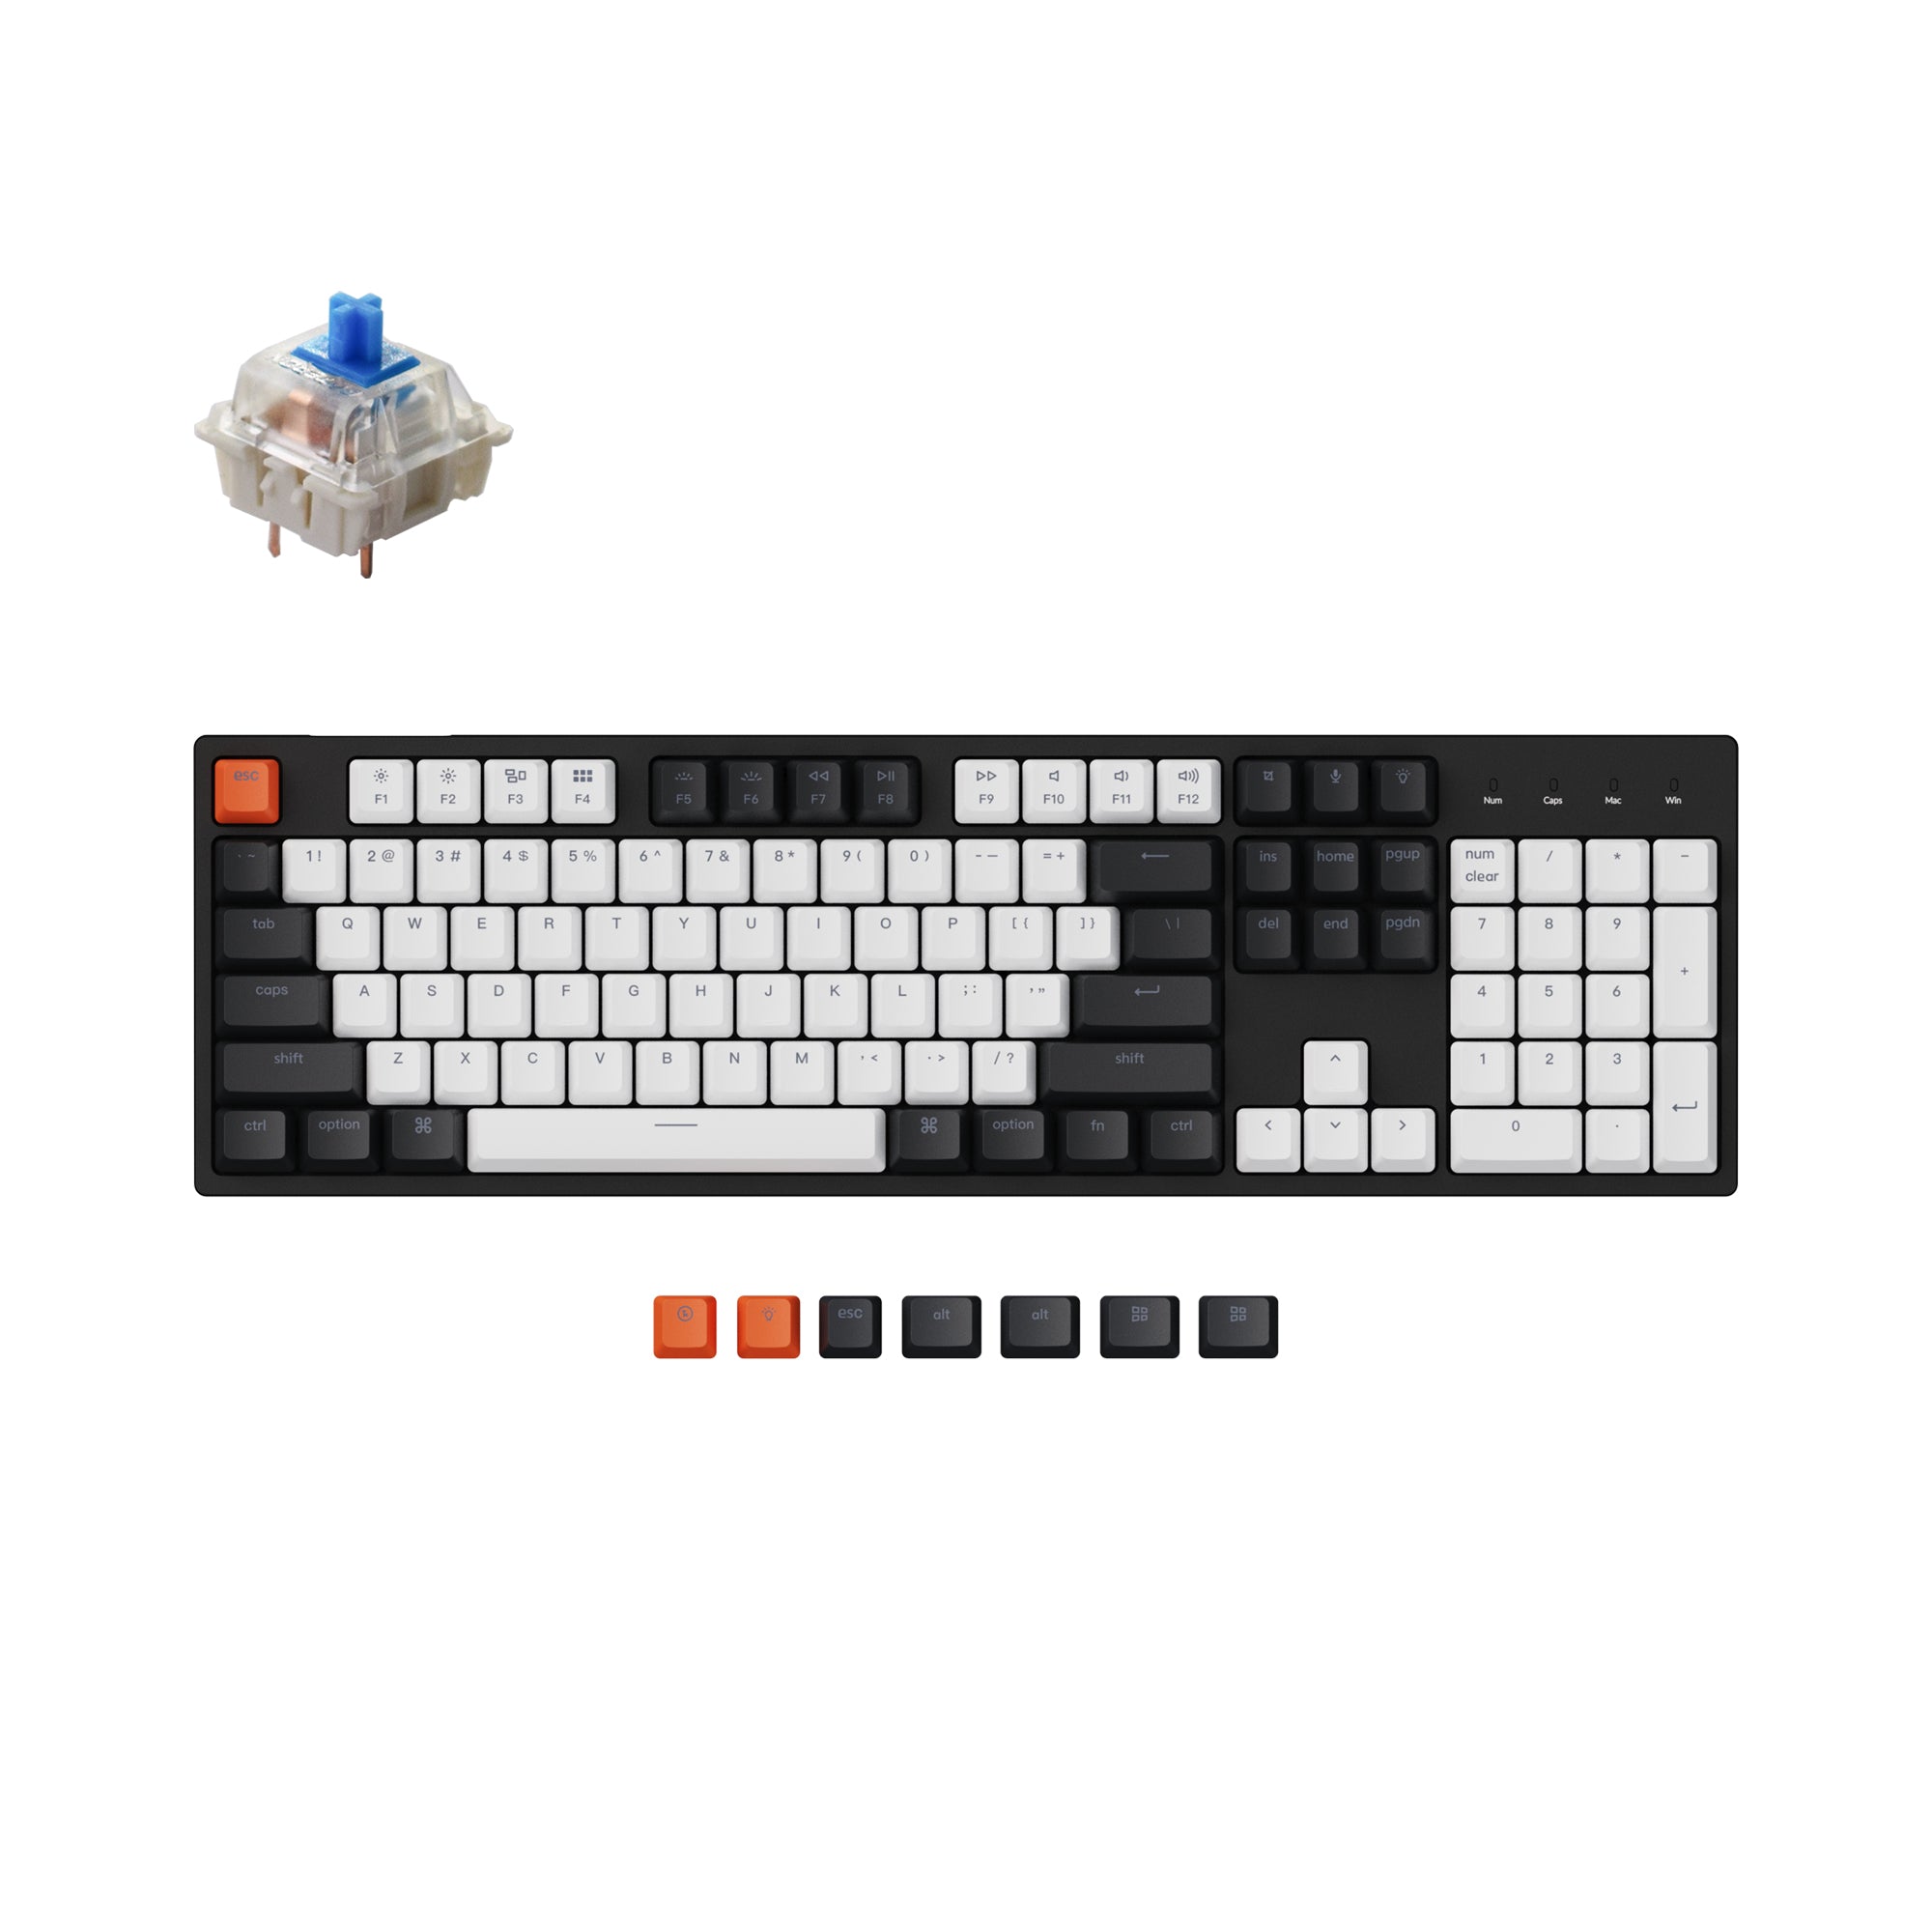 Keychron C2 hot swappable wired type c mechanical keyboard 104 keys full size layout for Mac Windows iOS Gateron switch blue